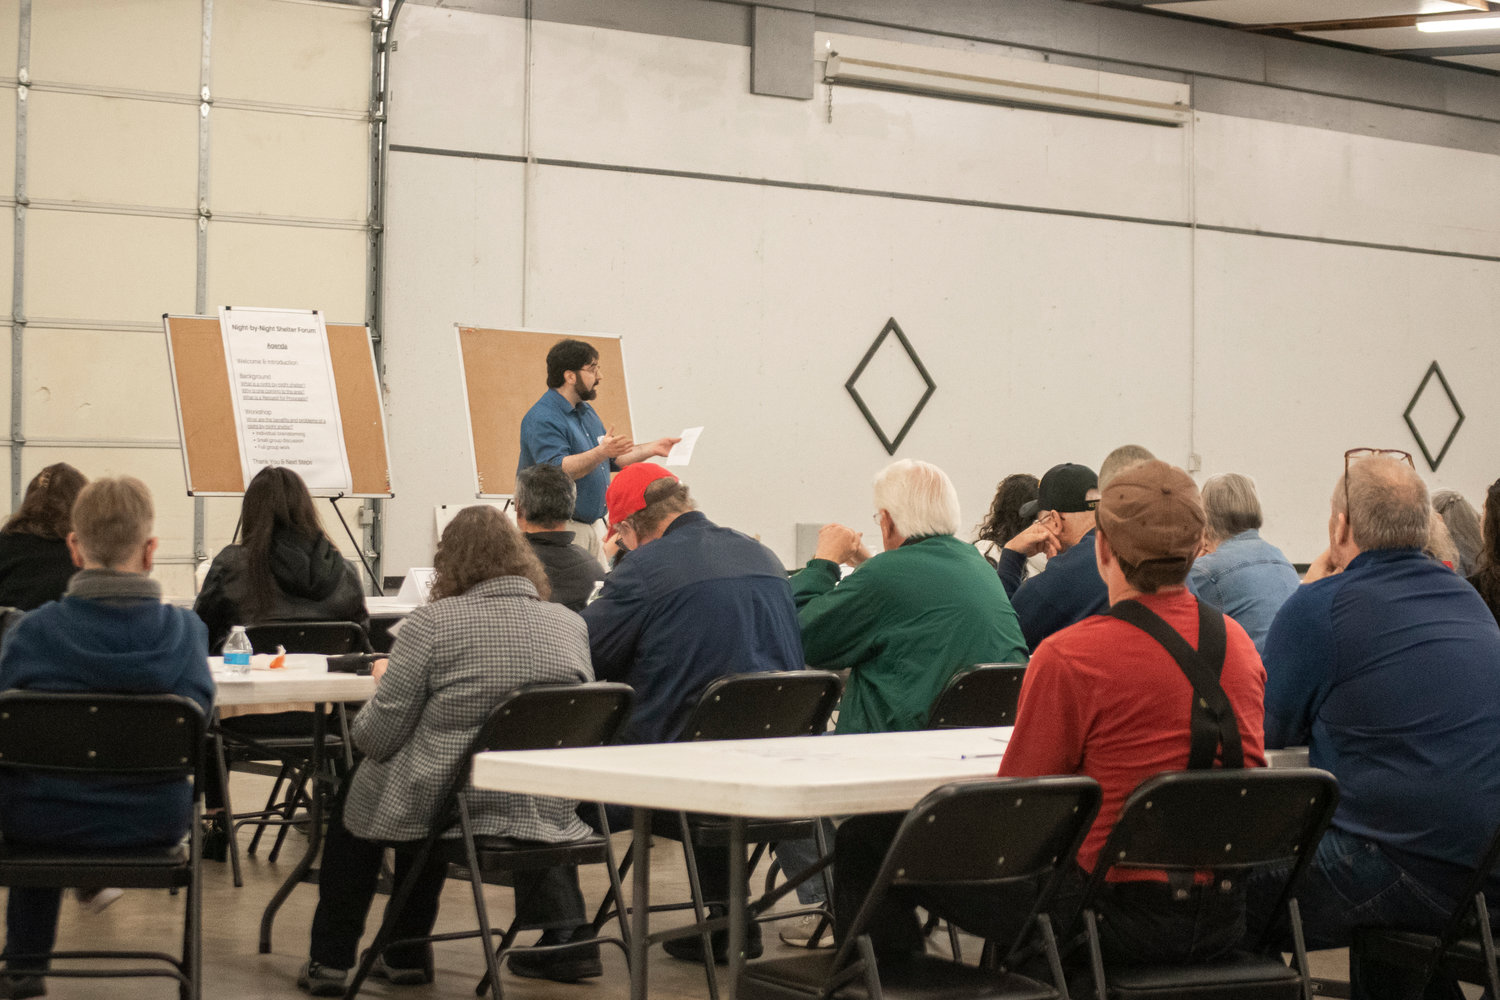 Lewis County Special Projects Deputy Prosecuting Attorney Eric Eisenberg speaks to attendees during a facilitated public forum on a proposed night-by-night shelter in Lewis County on Thursday night at the Southwest Washington Fairgrounds.